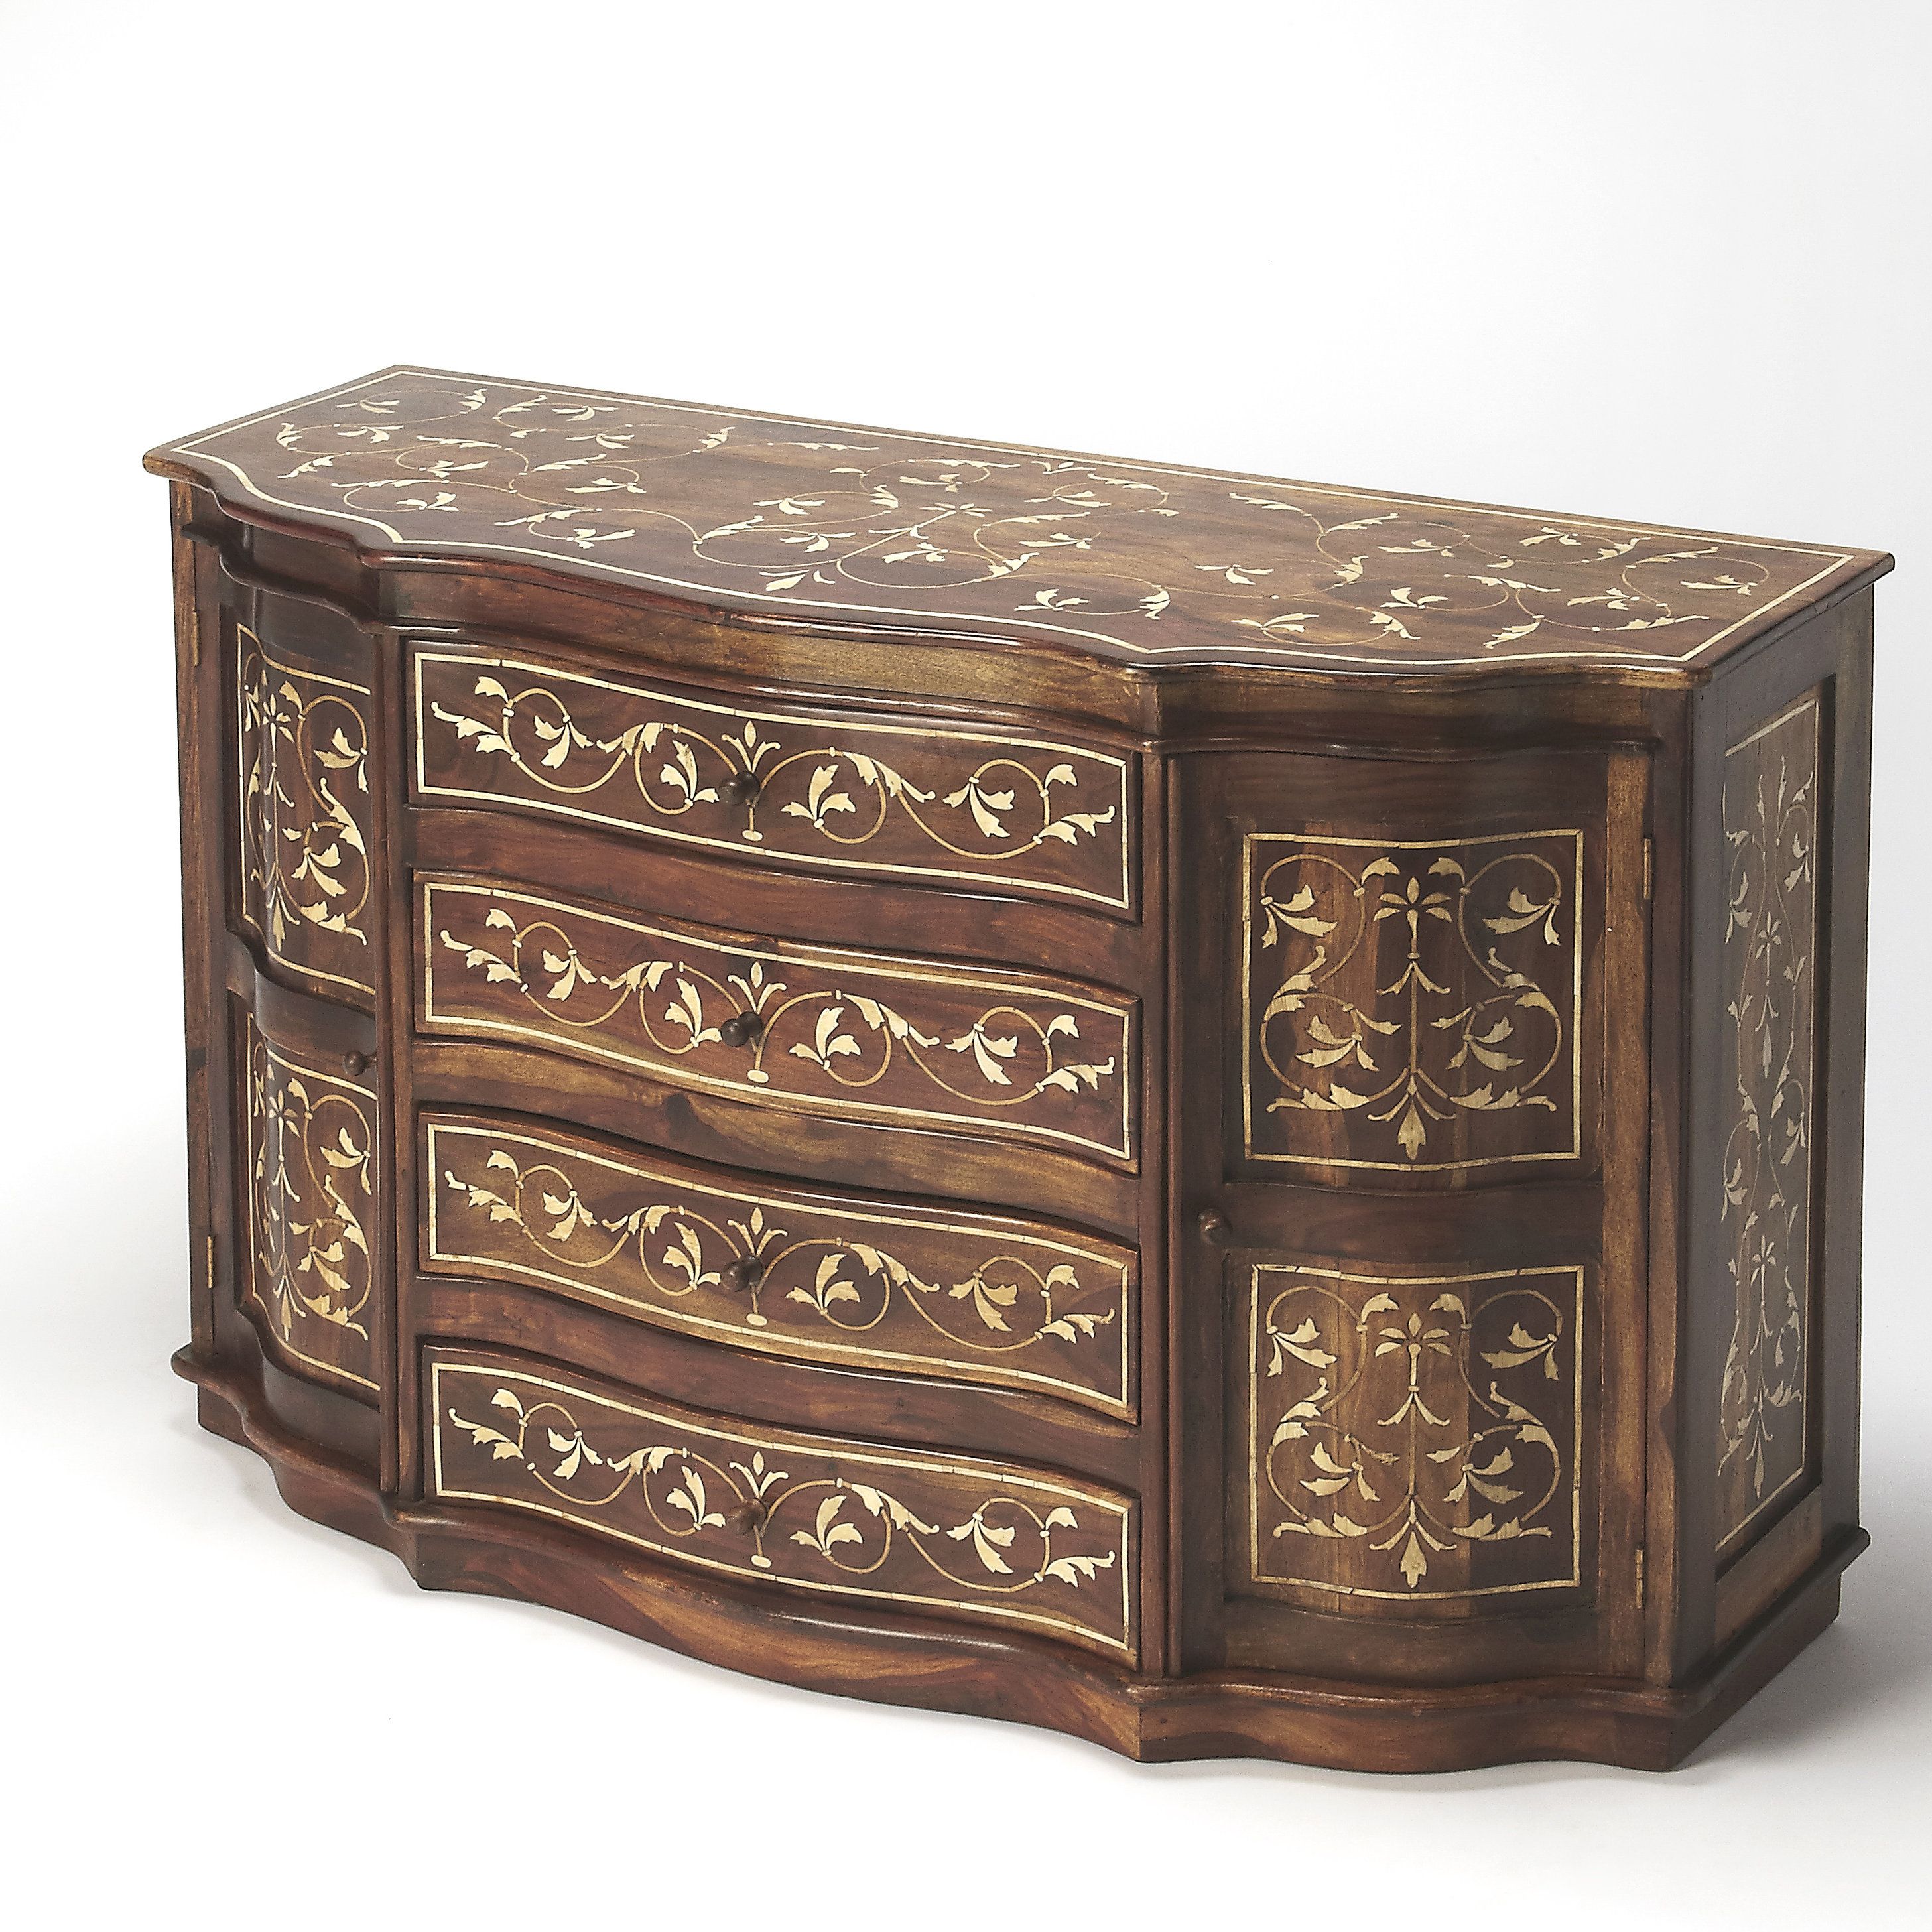 Beringen Sideboard Throughout Most Recently Released Massillon Sideboards (View 6 of 20)